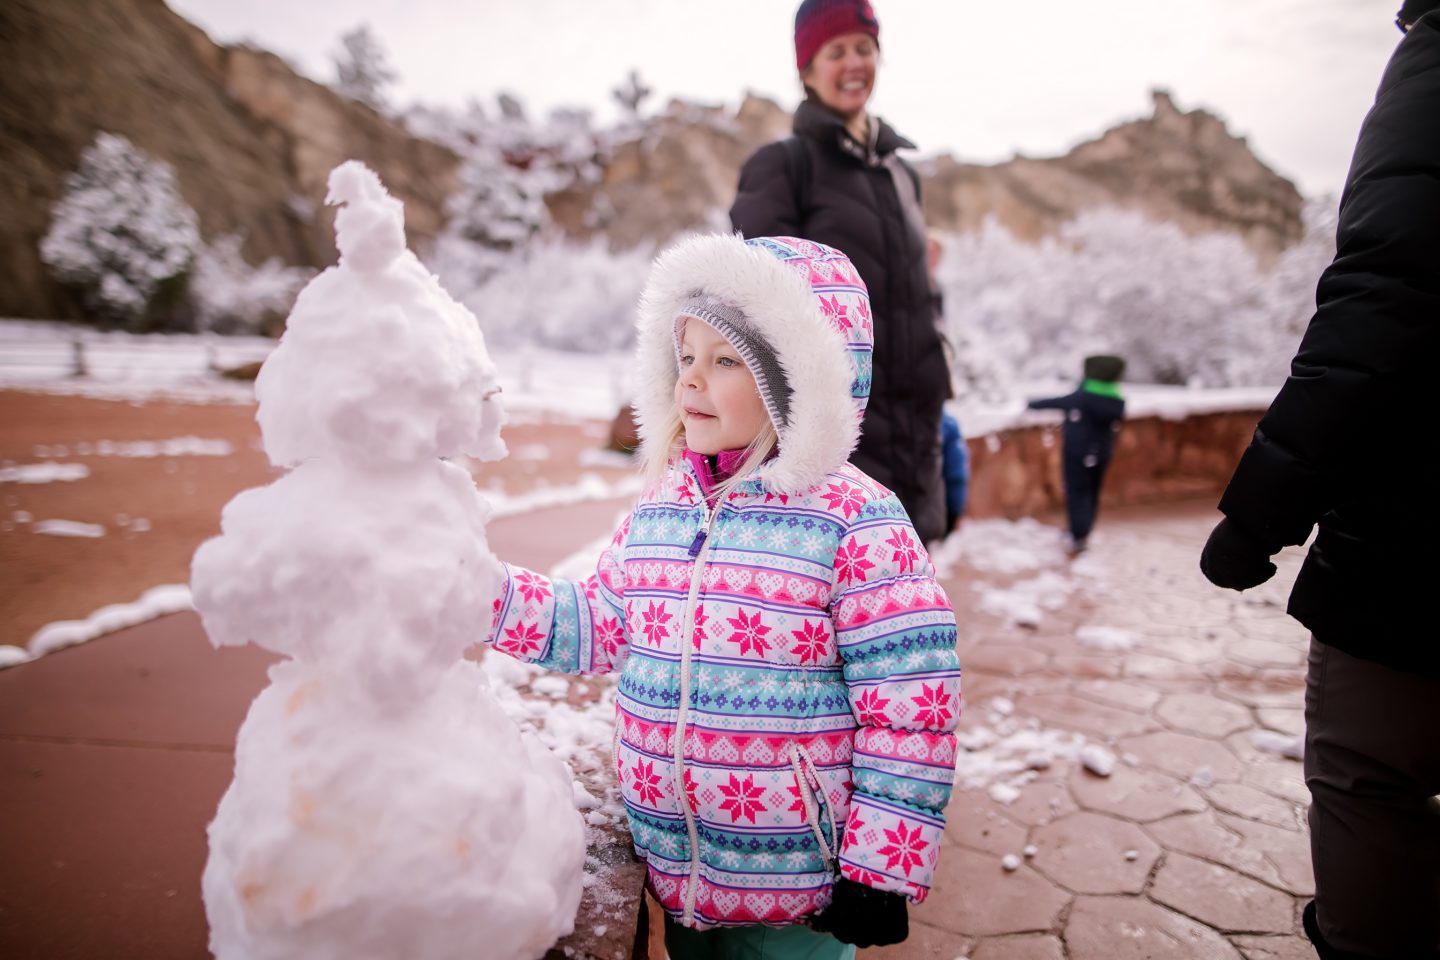 8 ways to get out and enjoy winter with kids by Tamara Johnson for Hike it Baby